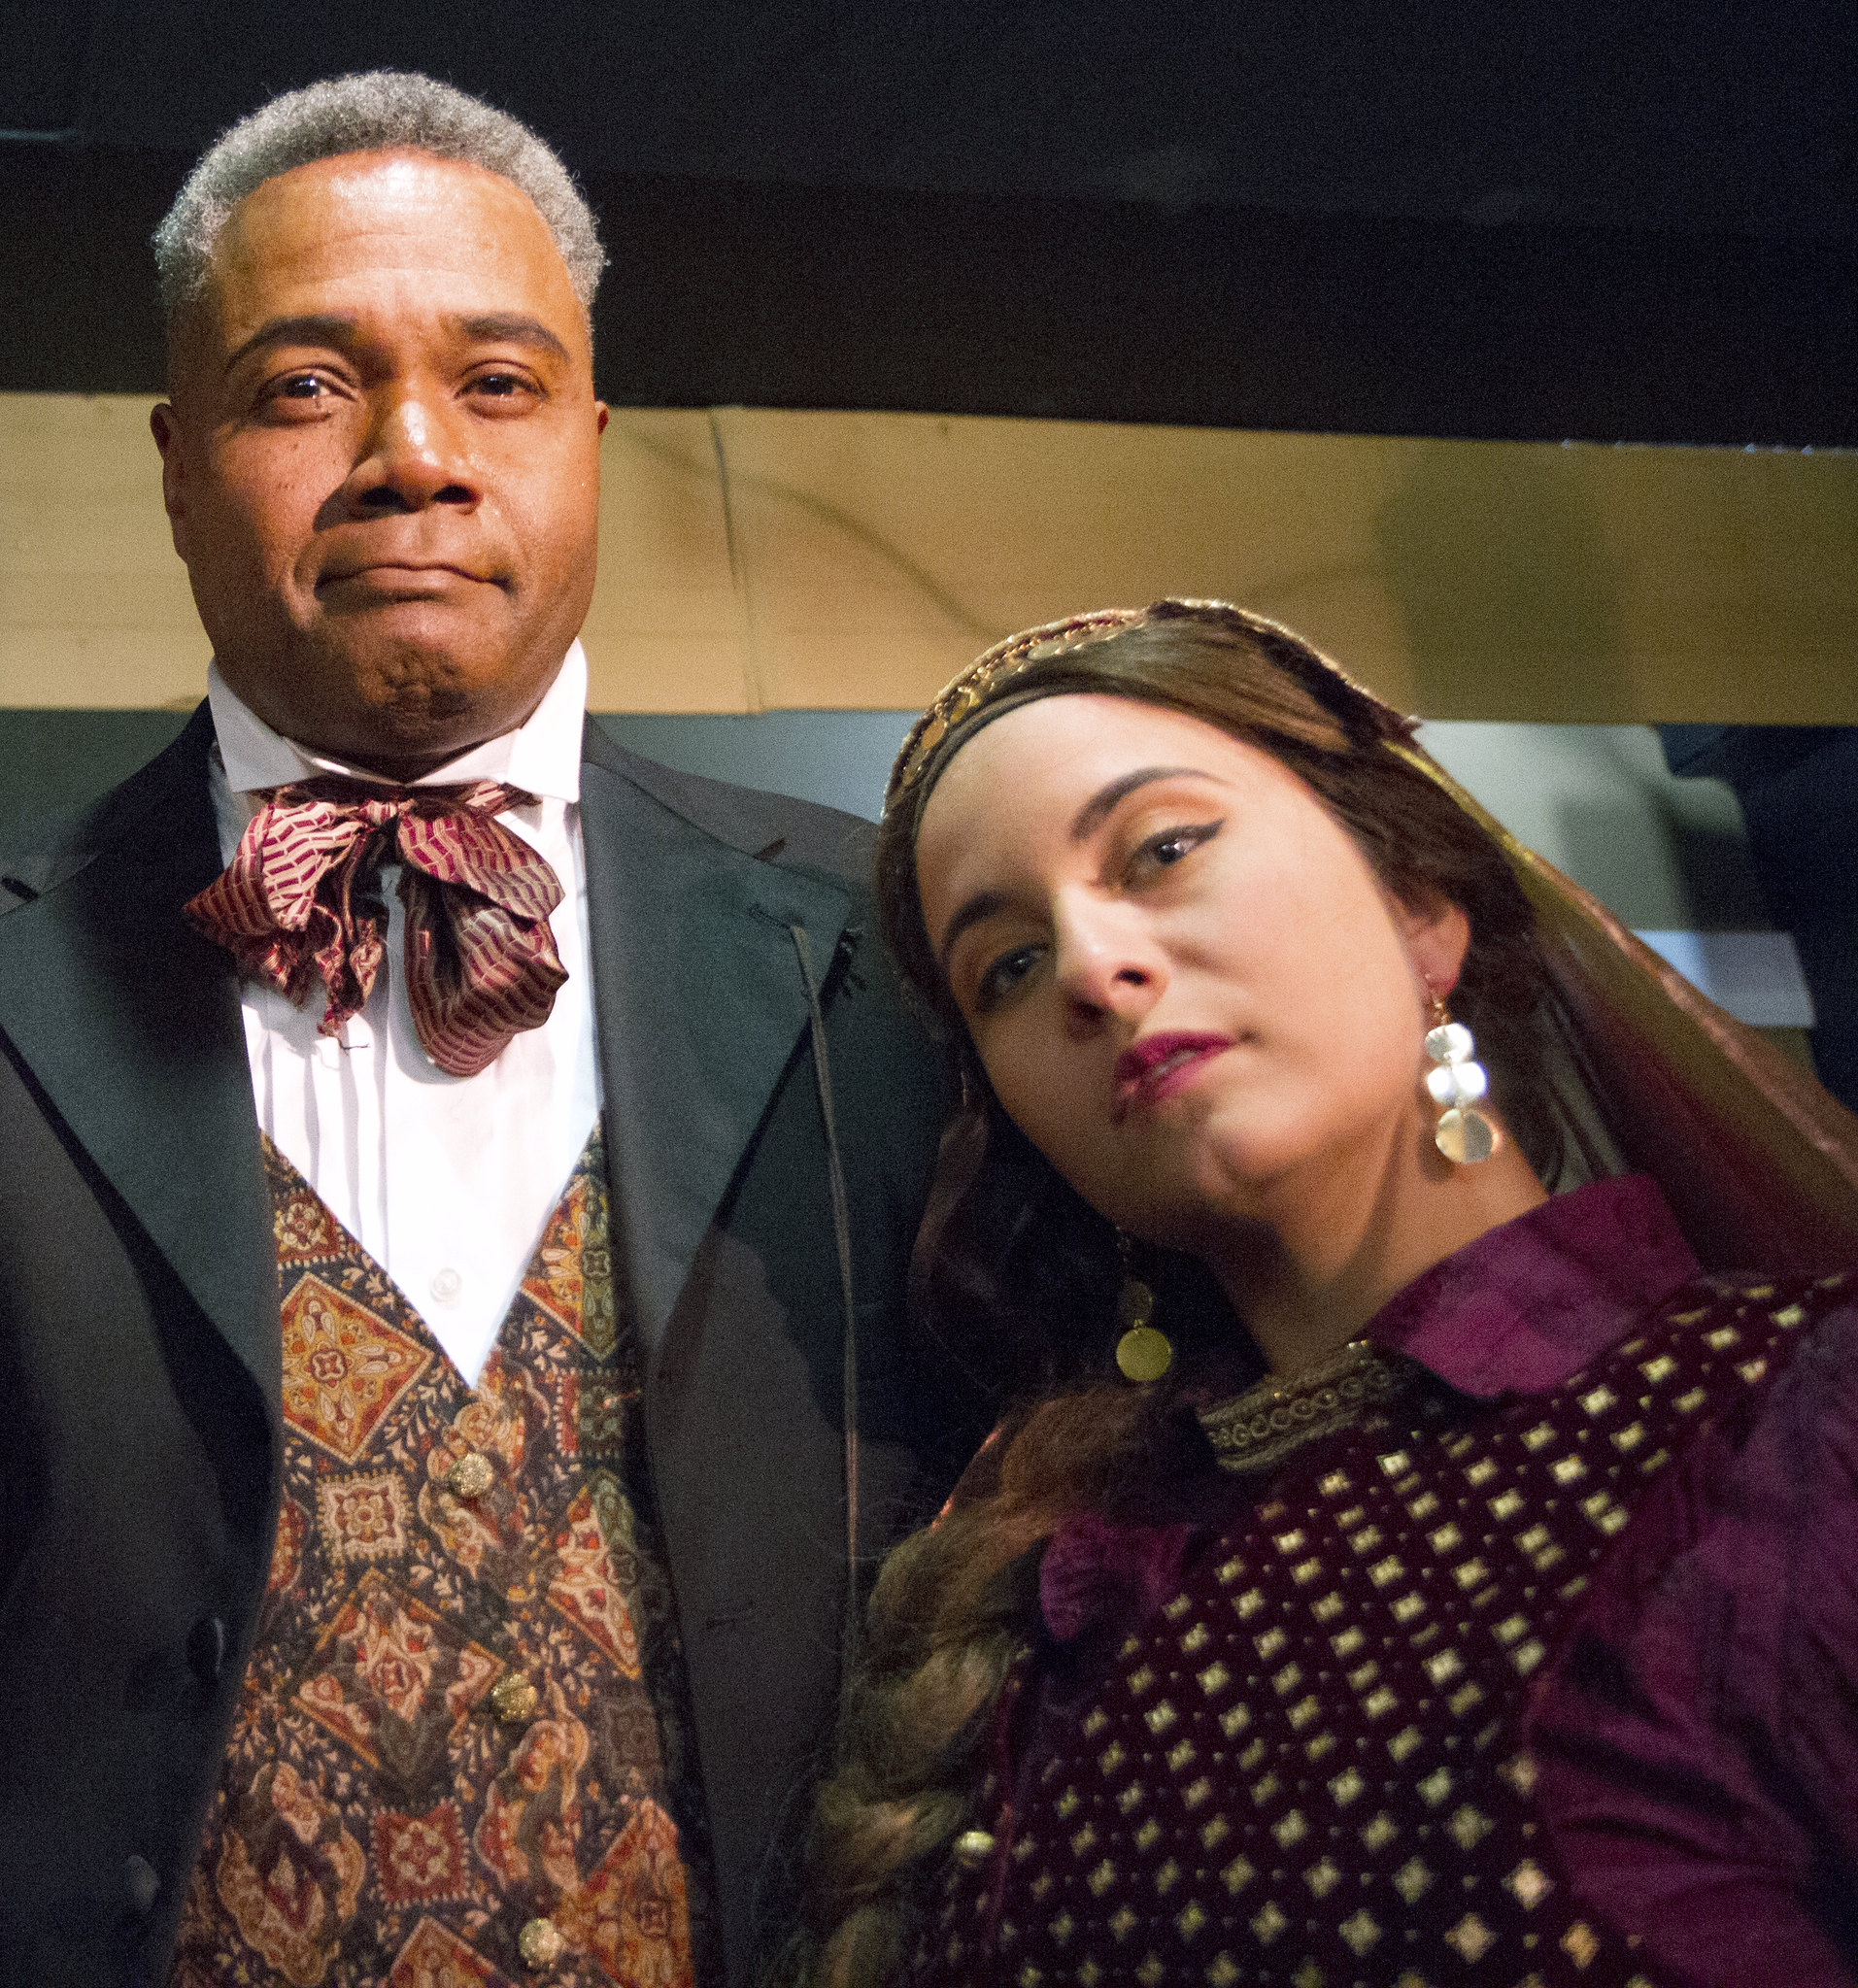 Helena Landless: Both Darryl Maximilian Robinson as The Chairman Mr. William Cartwright and Anna Gallucci as Helena Landless were 2019 BWW Chicago Award Nominees for Best Ensemble for Drood.